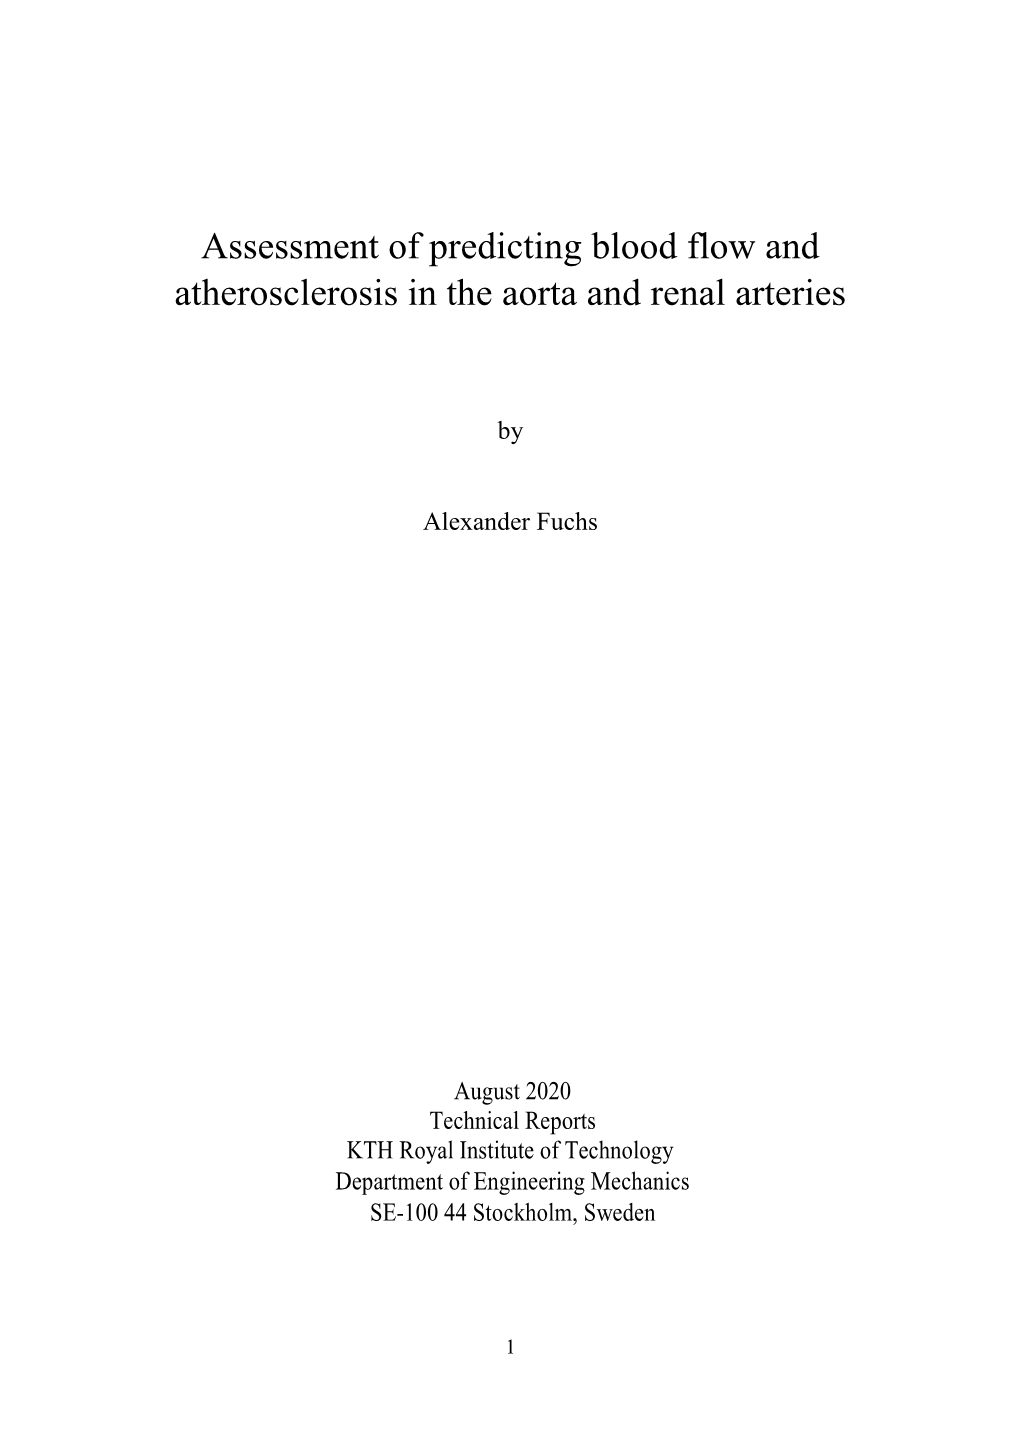 Assessment of Predicting Blood Flow and Atherosclerosis in the Aorta and Renal Arteries